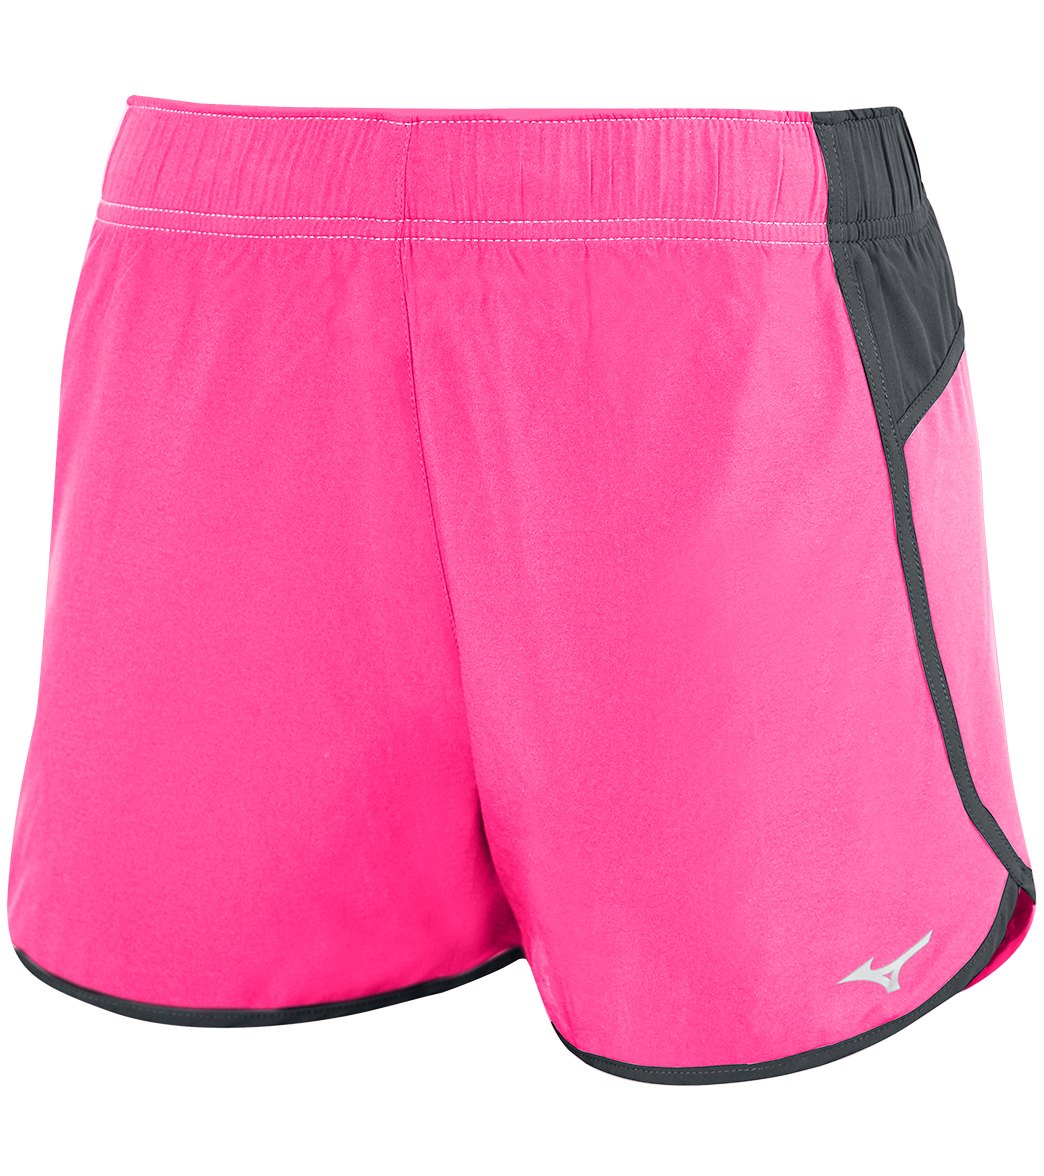 Mizuno Girls' Youth Atlanta Cover Up Volleyball Short Big Kid - Shocking Pink/Charcoal Large - Swimoutlet.com